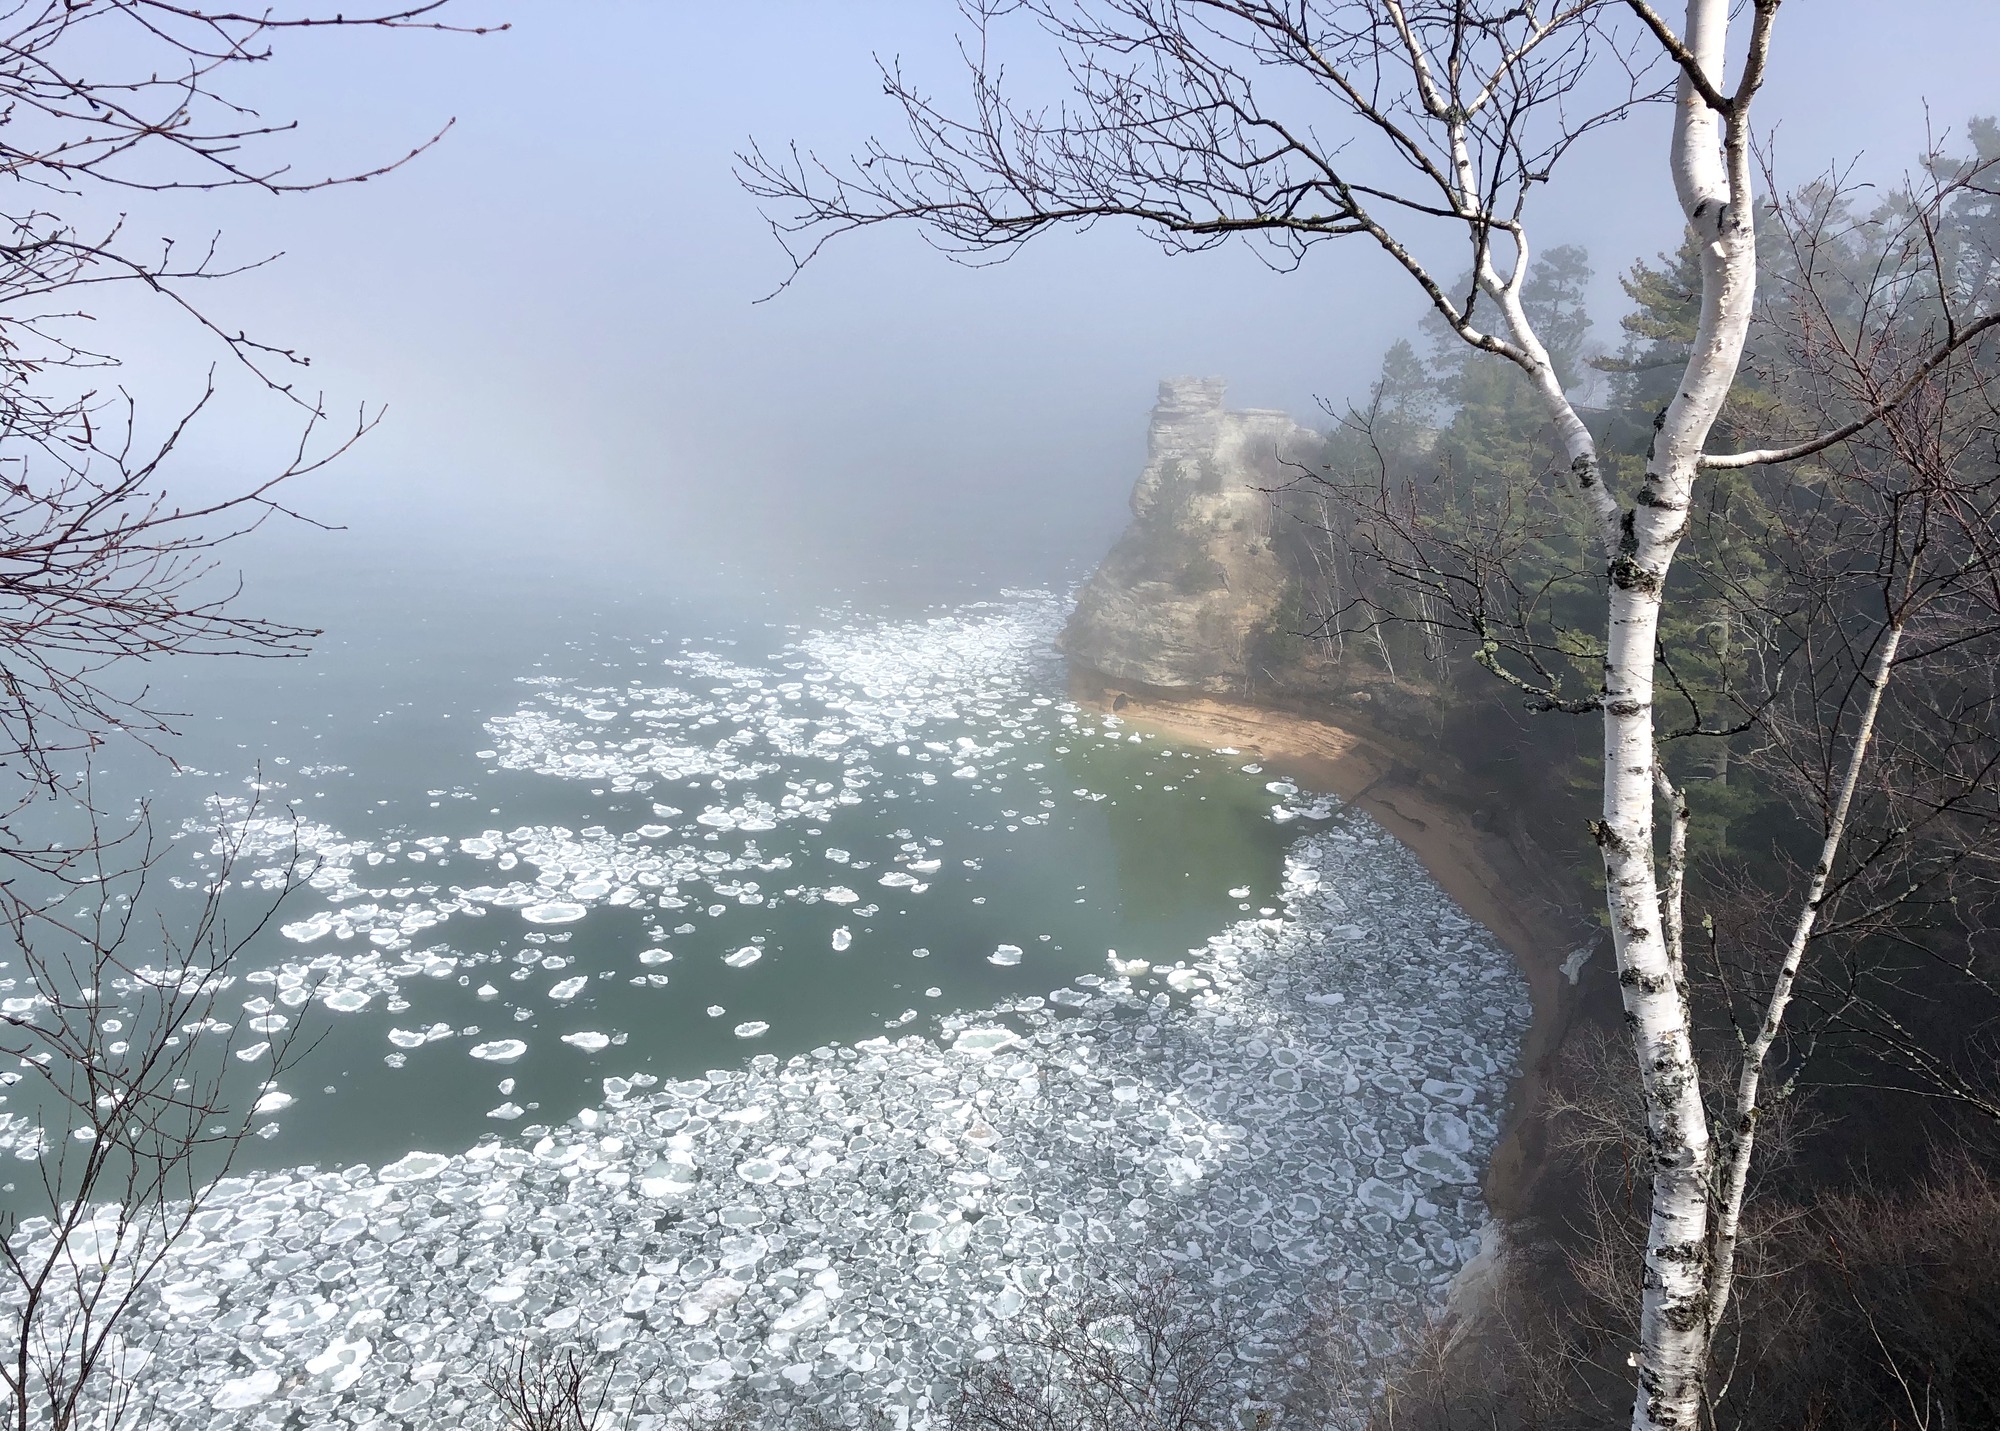 Miners Castle rock formation with pancake shaped ice blocks floating in Lake Superior. A faint rainbow in the fog.